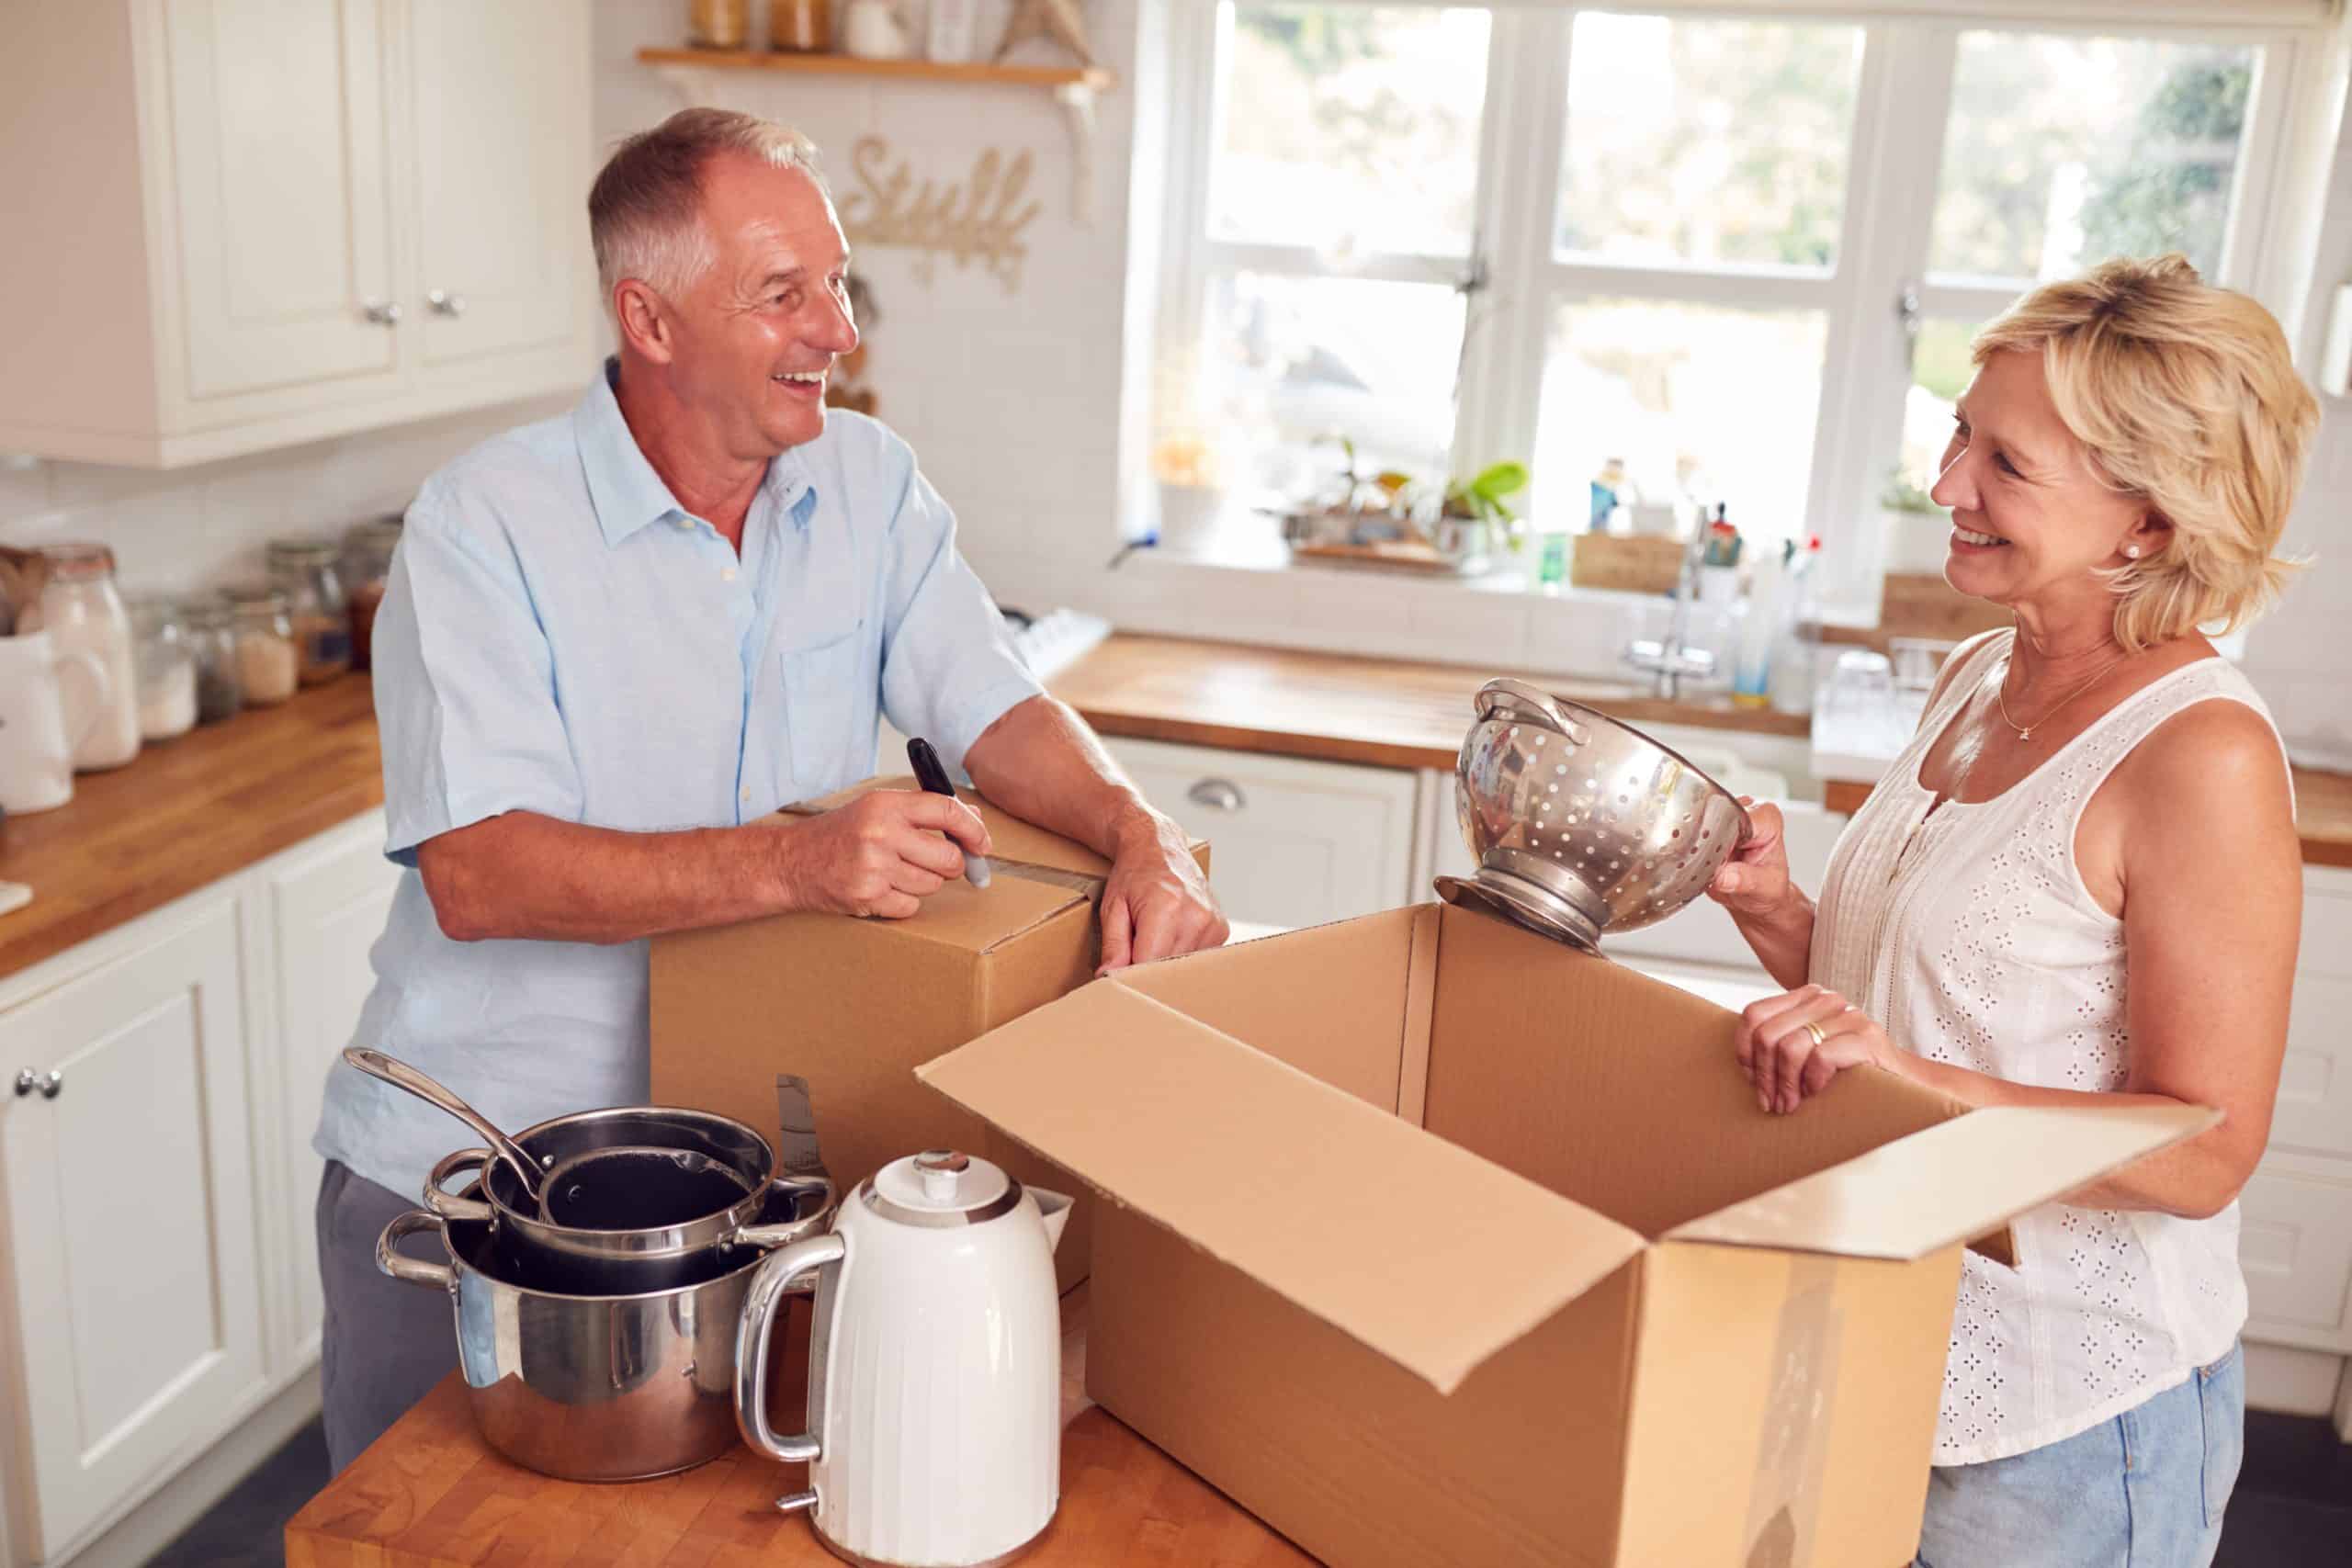 Storage facilities in Brighton and Hove - image shows a couple smiling together packing kitchen items into a cardboard box in their kitchen